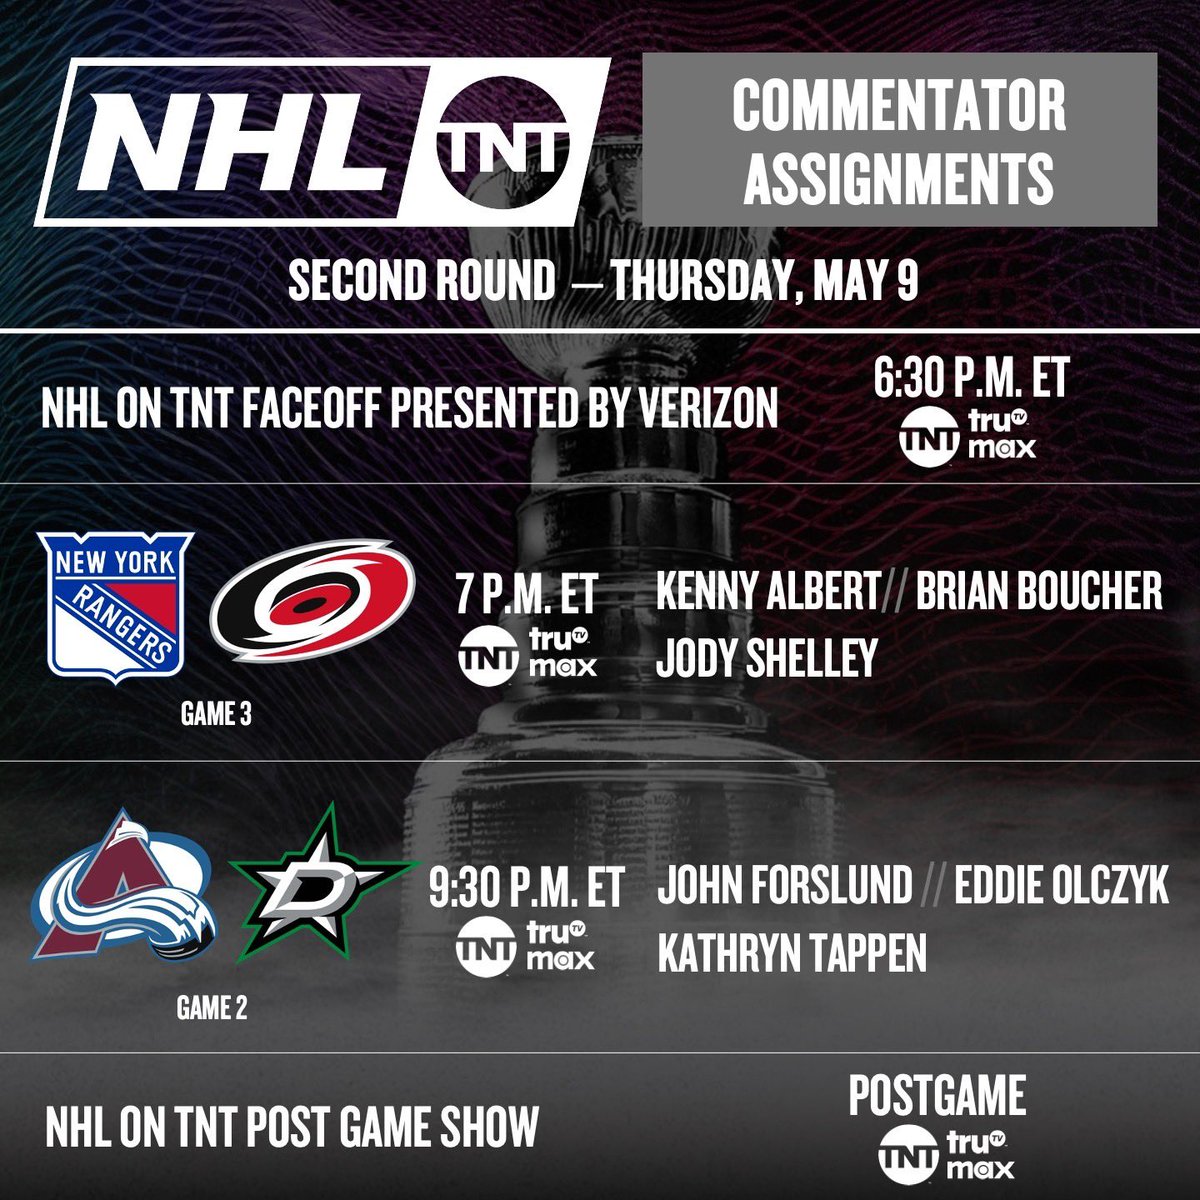 Commentator assignments for tonight’s @NHL_On_TNT #StanleyCupPlayoffs doubleheader ⏬